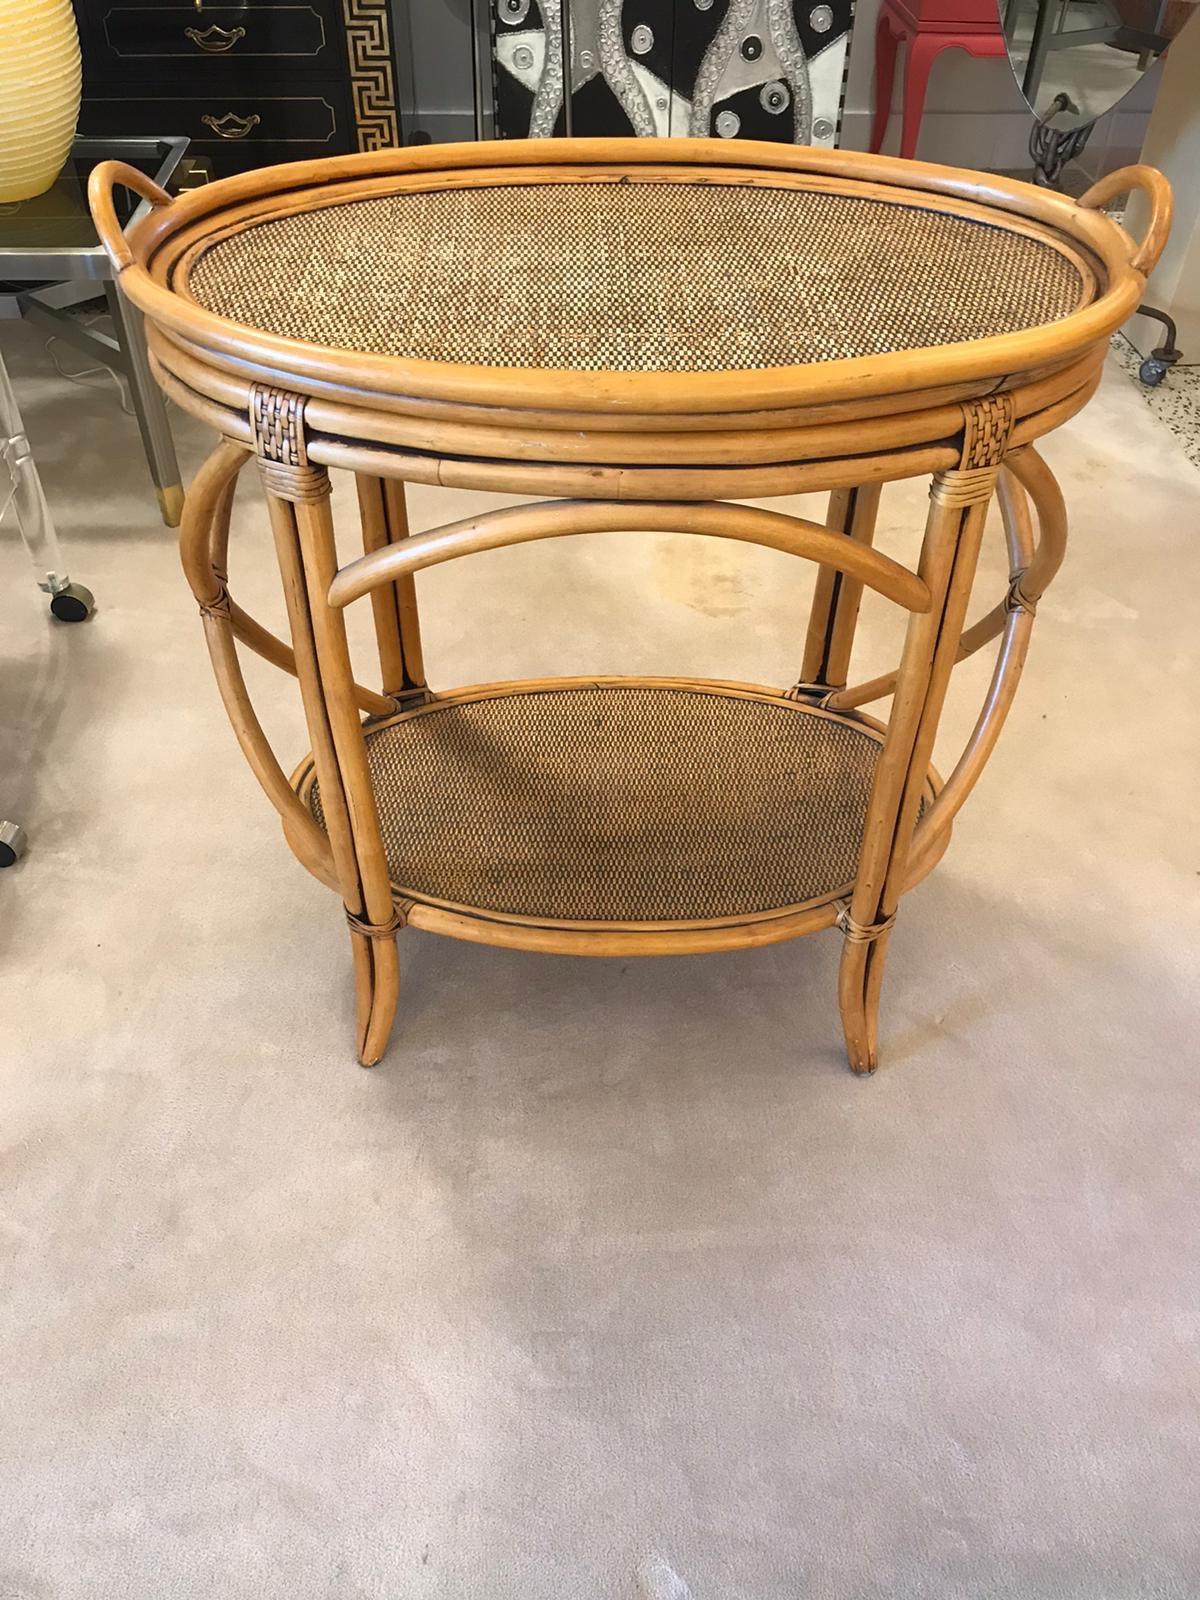 Grass Weave base and layered bent bamboo bar table with additional removable tray.